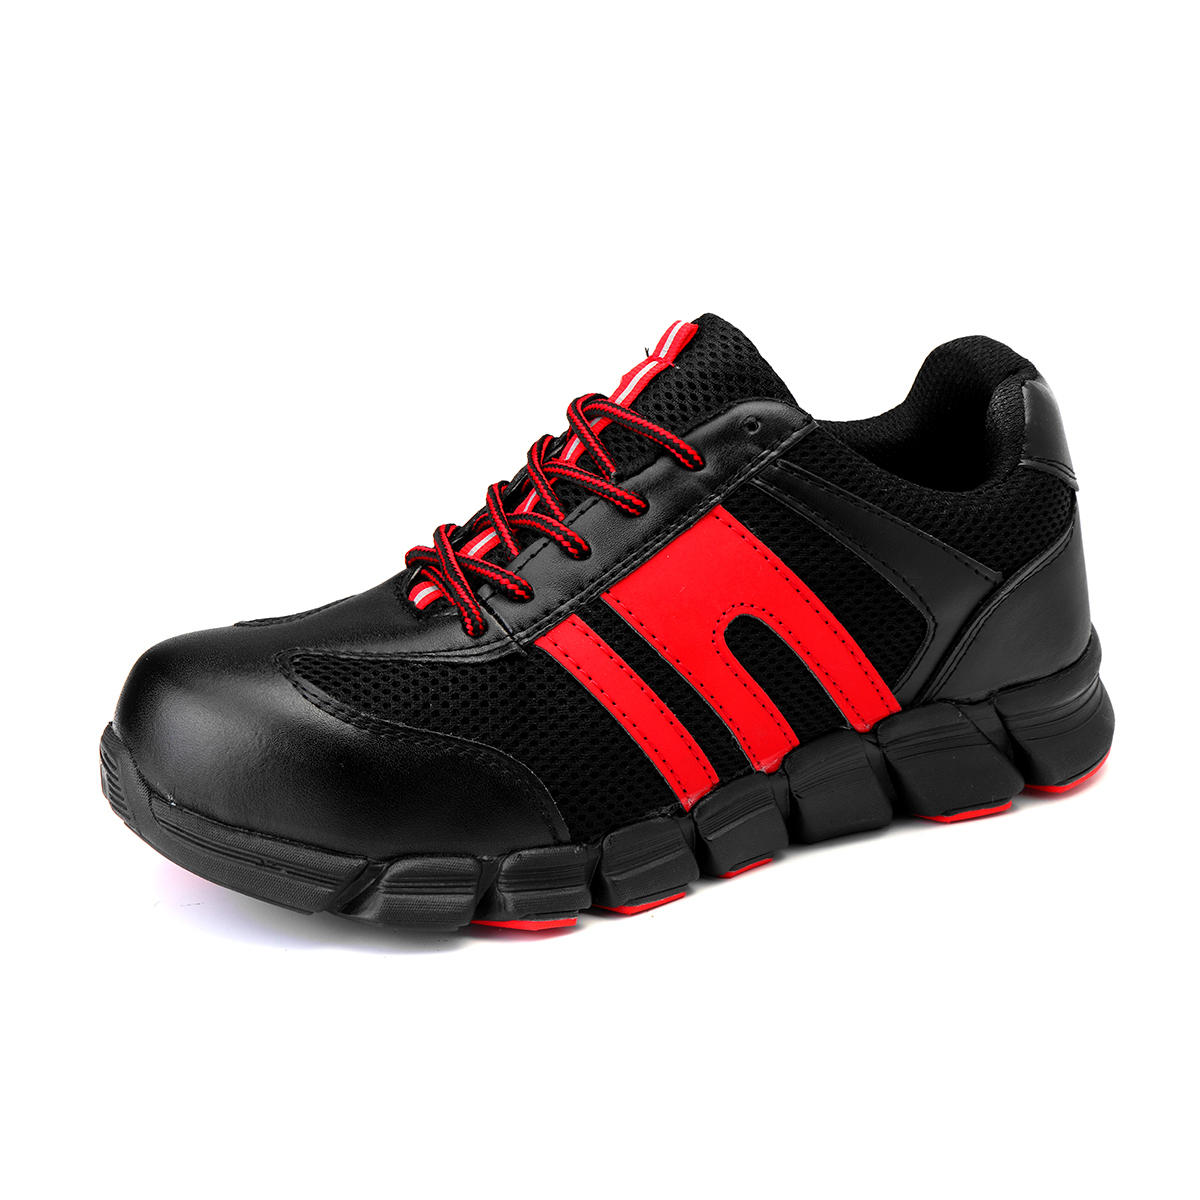 TENGOO Waterproof Safety Shoes Steel Work Shoes Men's Fashion Sports Shoes Non-Slip